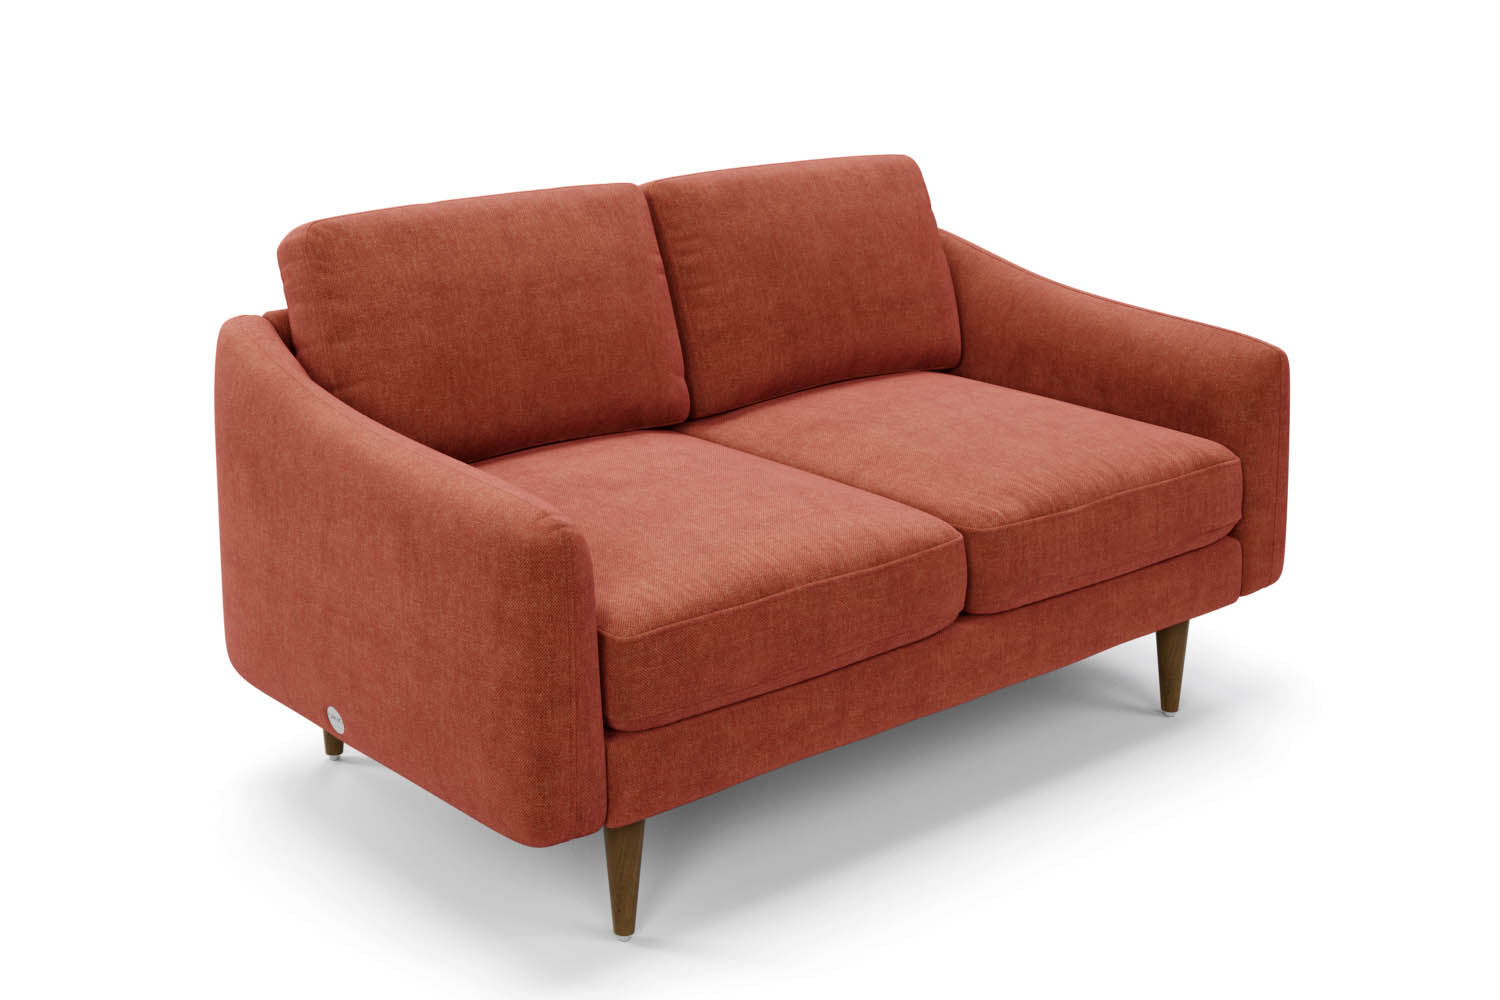 The Rebel 2 Seater Sofa in Spice with brown legs